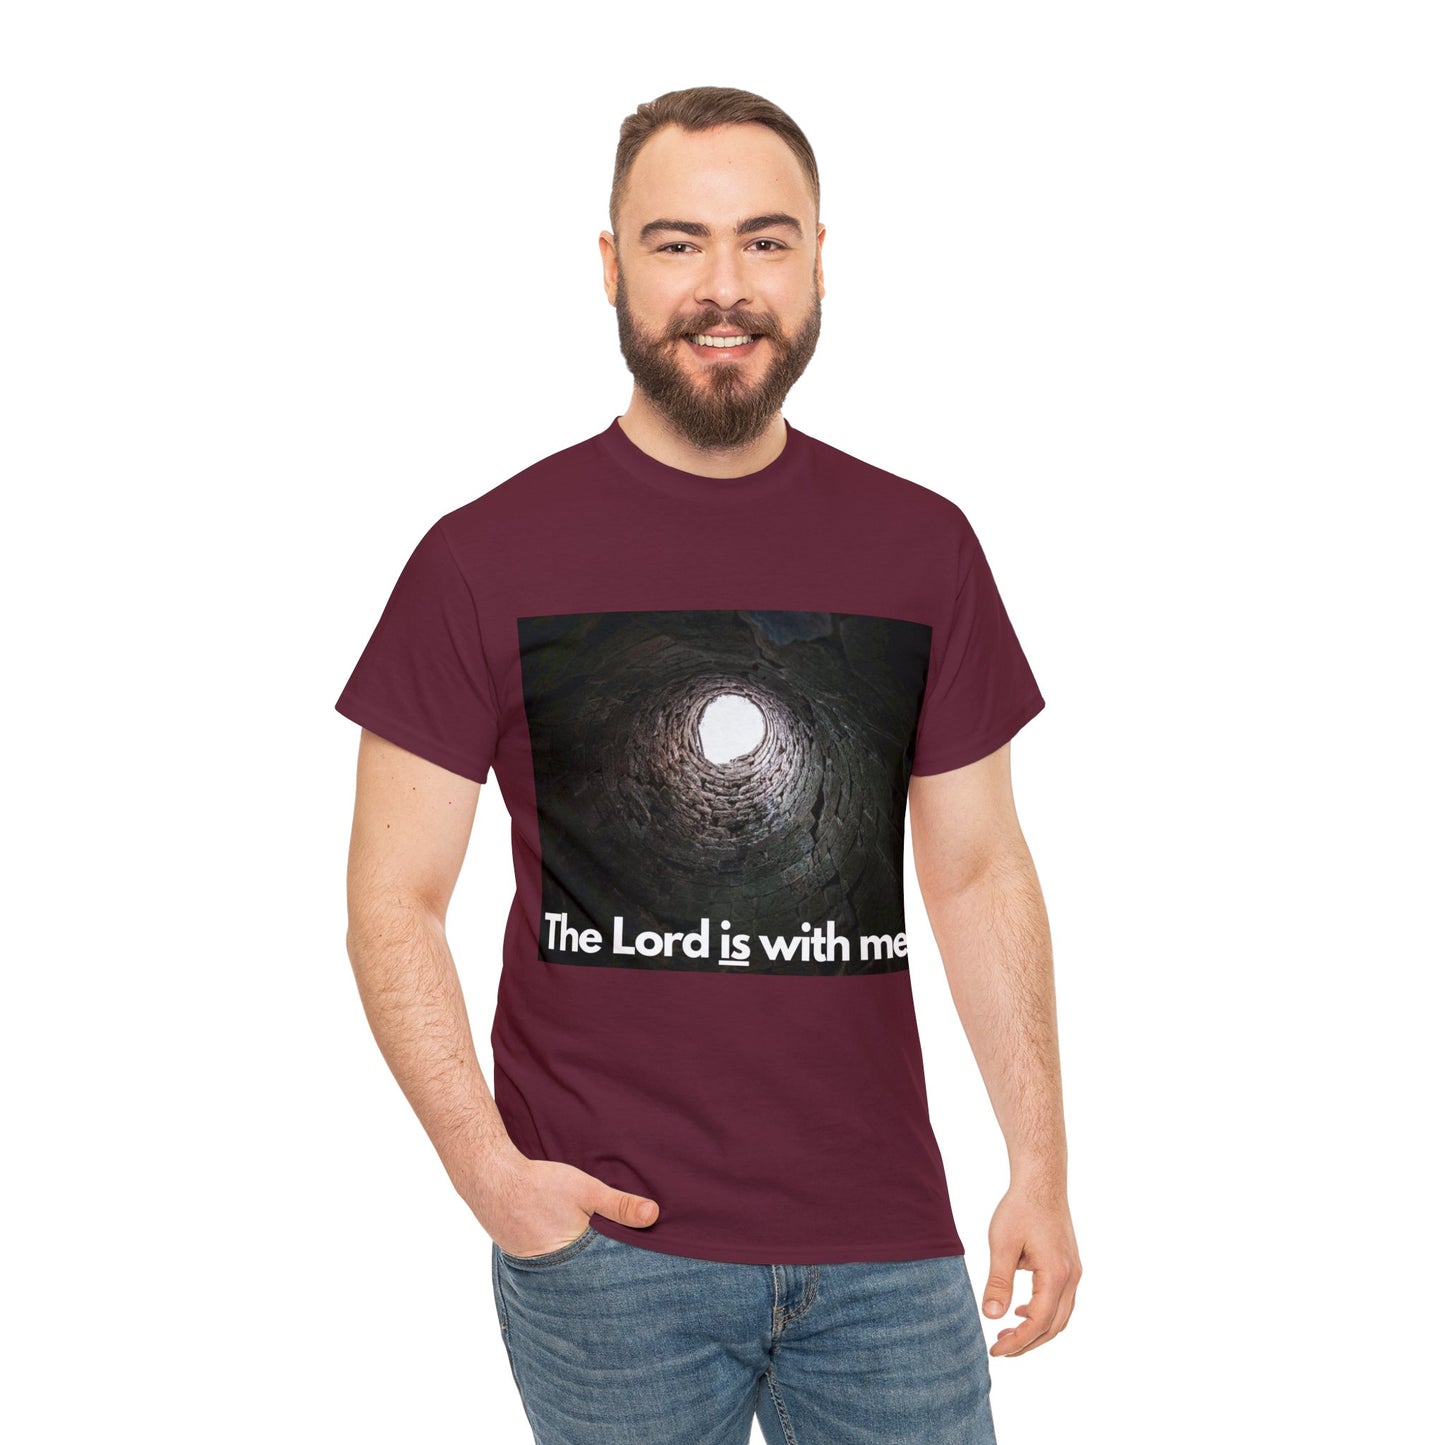 "The Lord is with me" T-shirt